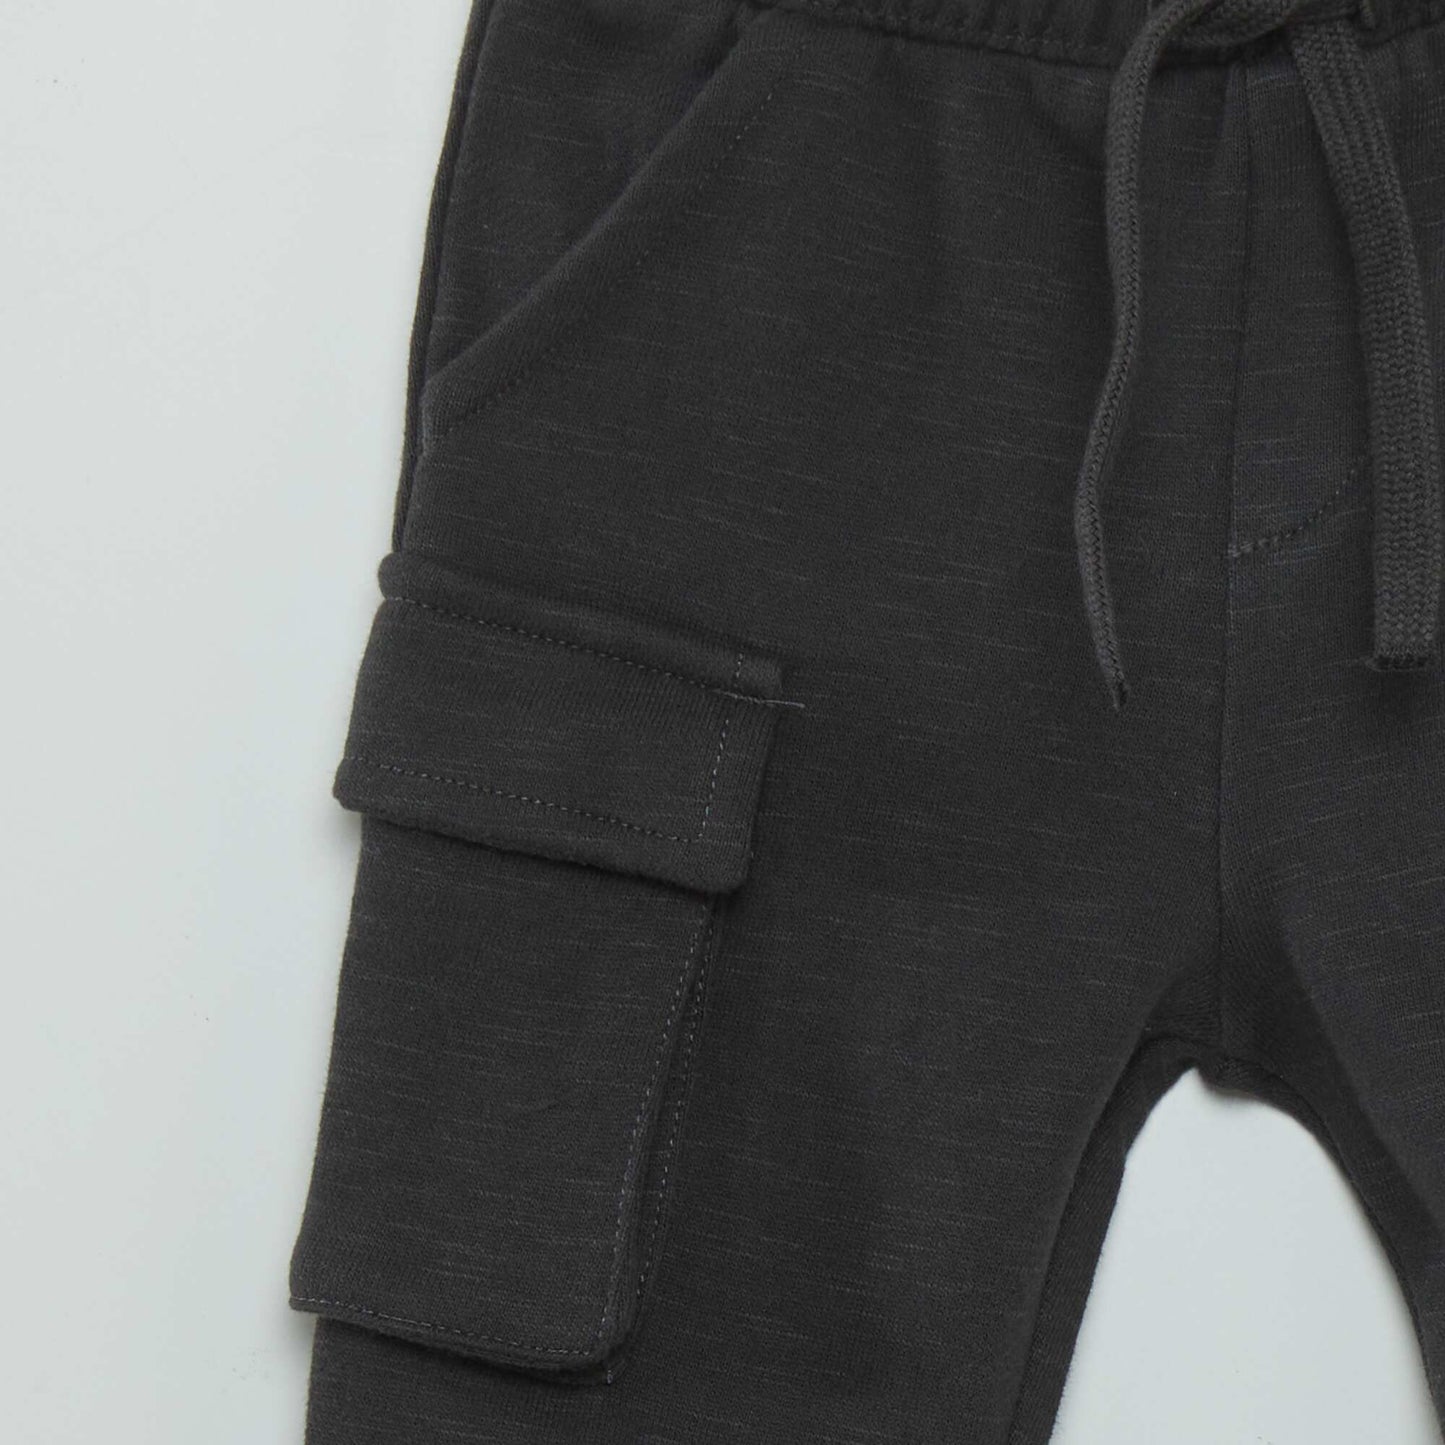 Sweatshirt fabric trousers with side pockets BLACK